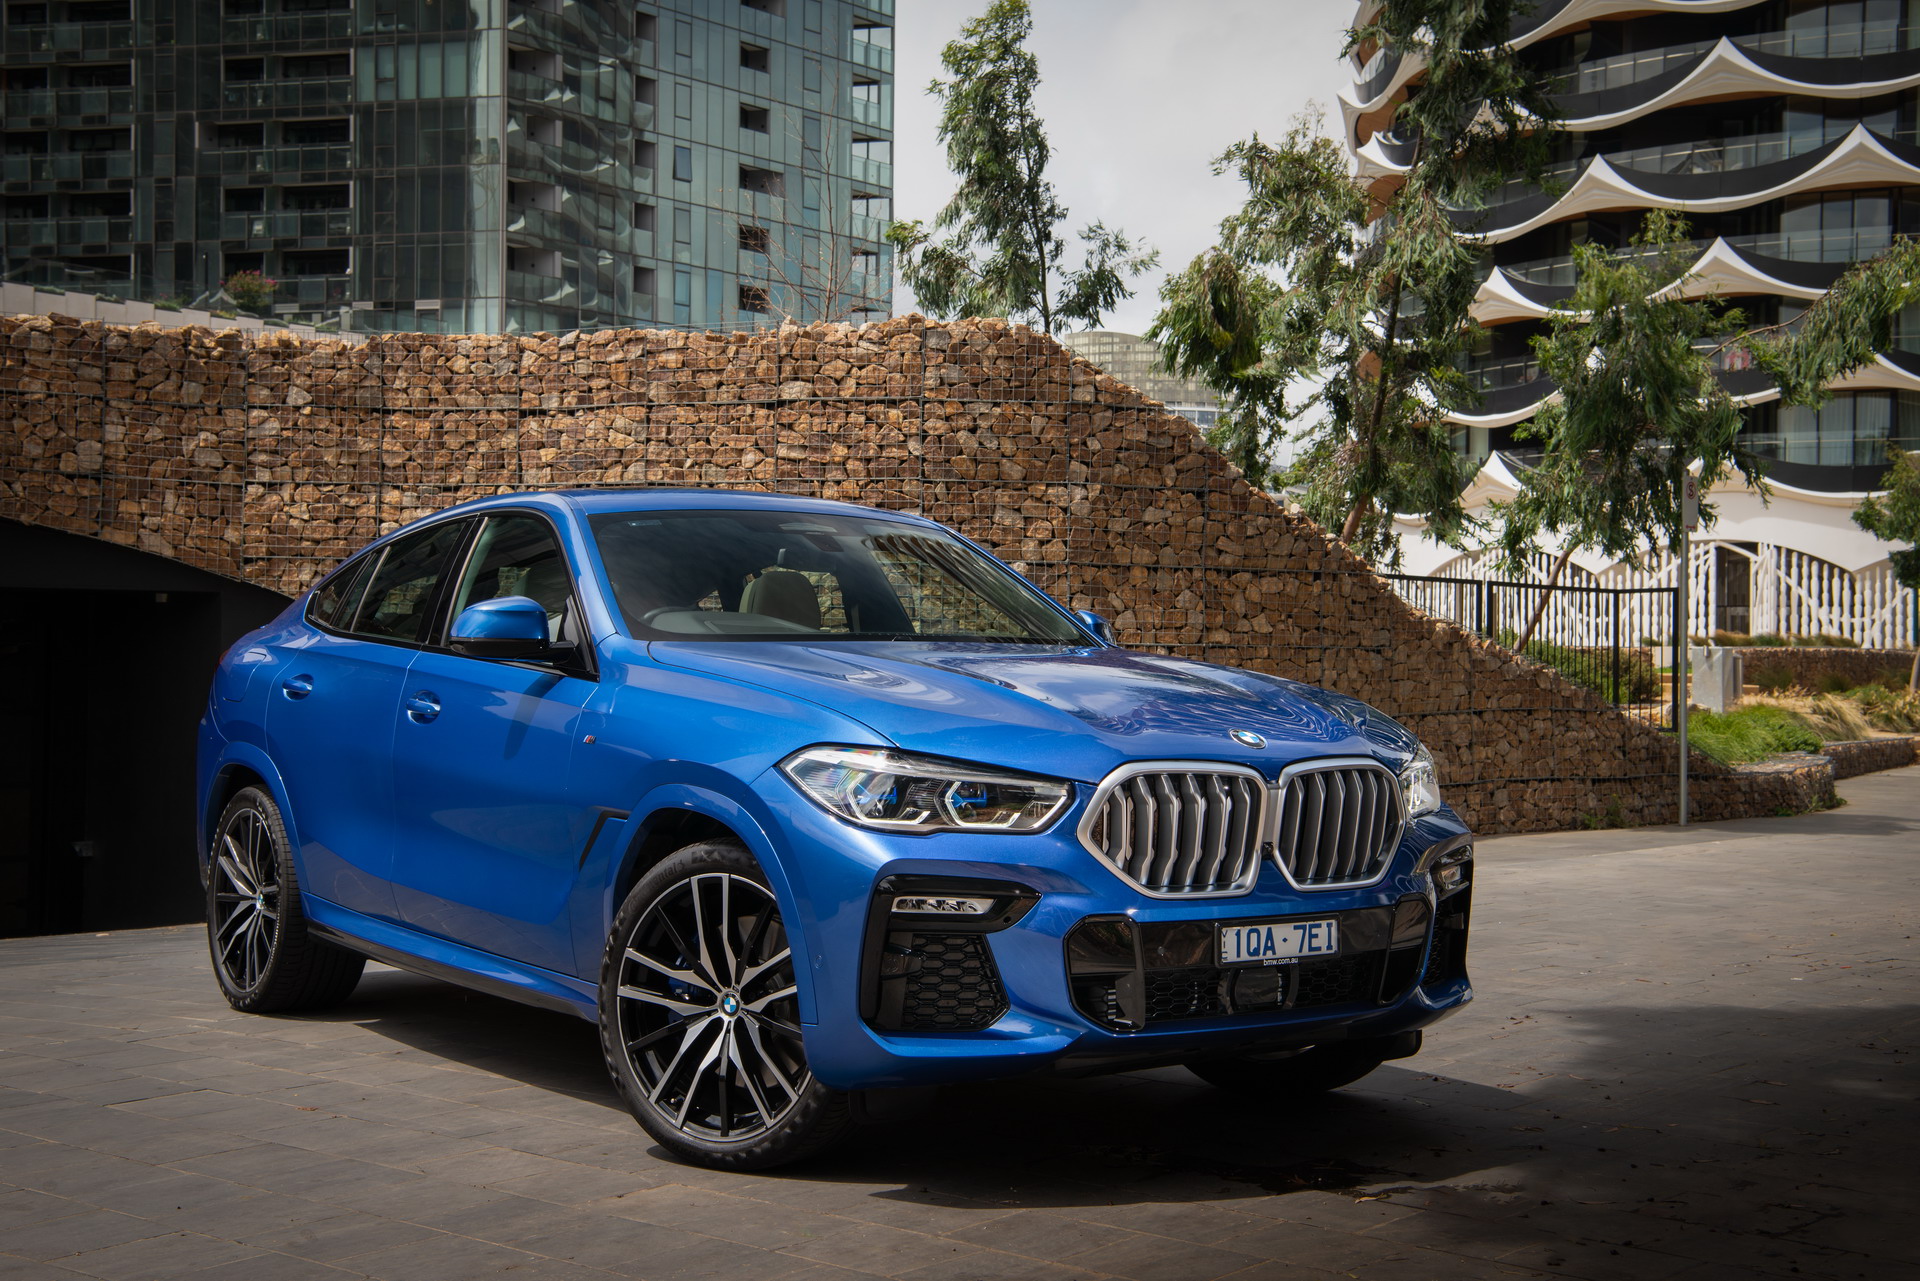 PHOTO GALLERY: The new BMW X6 (G06) in the Land of Oz